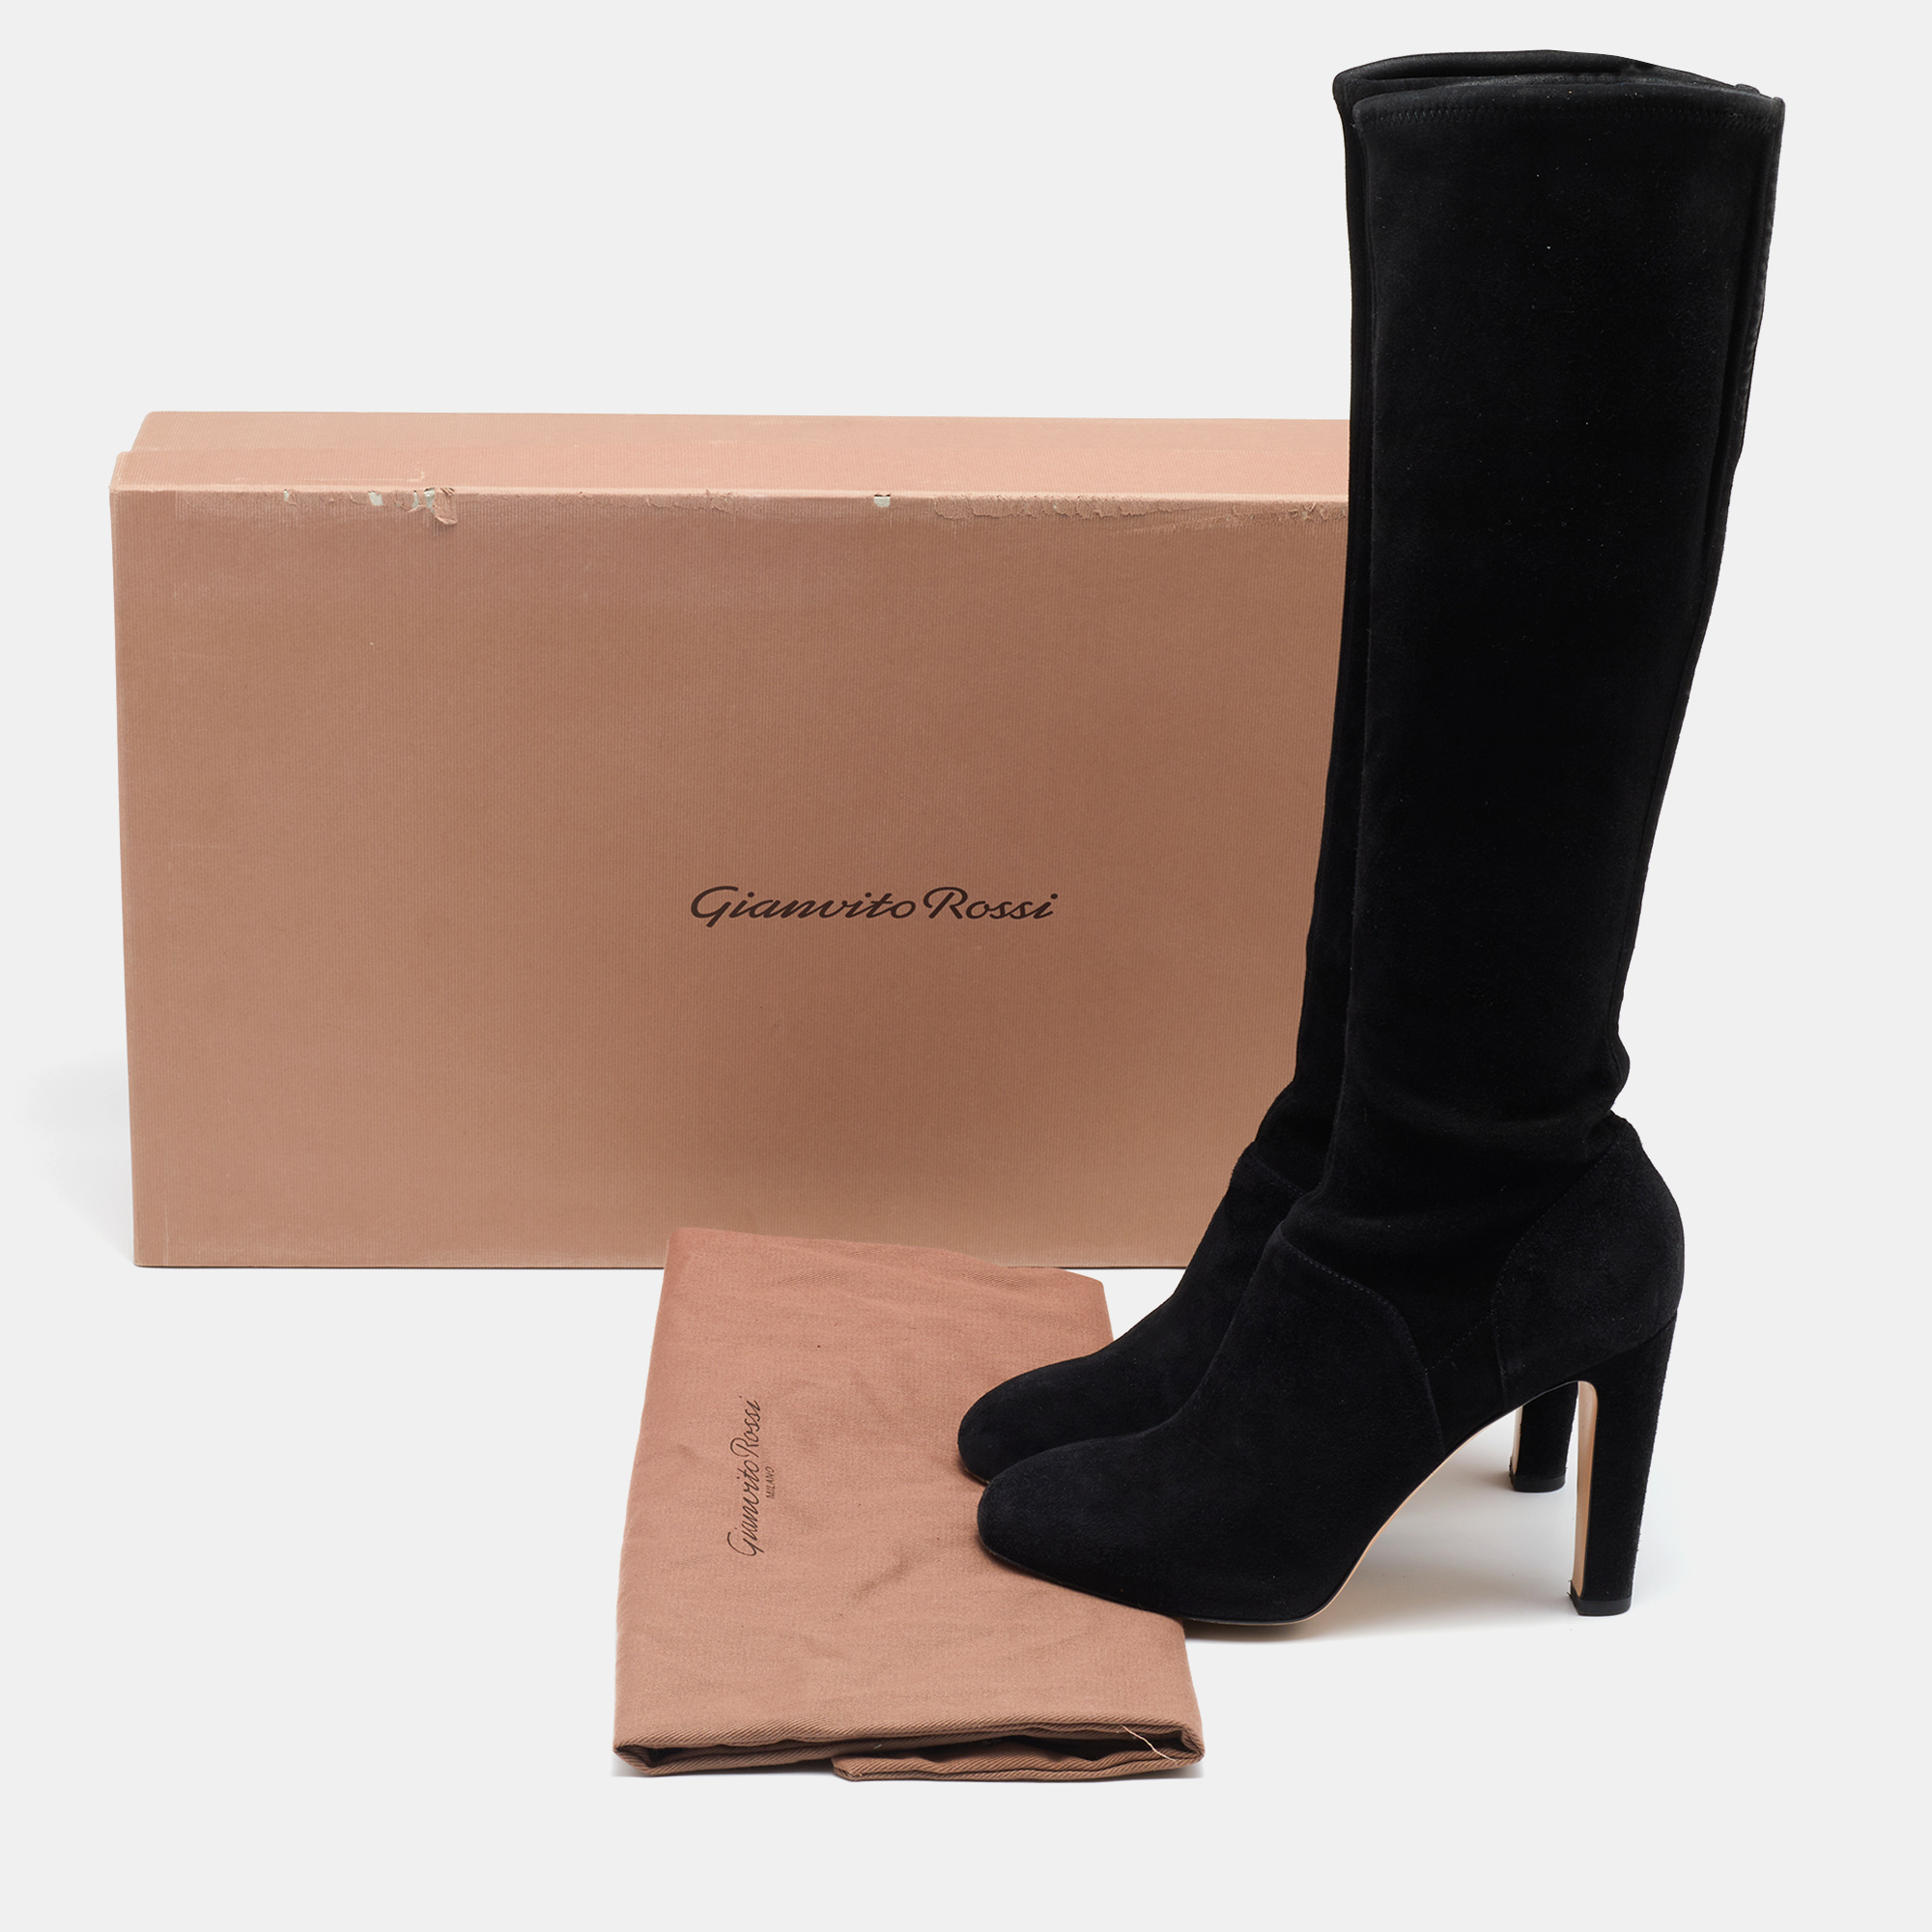 Gianvito Rossi Black Suede Knee Length Boots Size 37.5